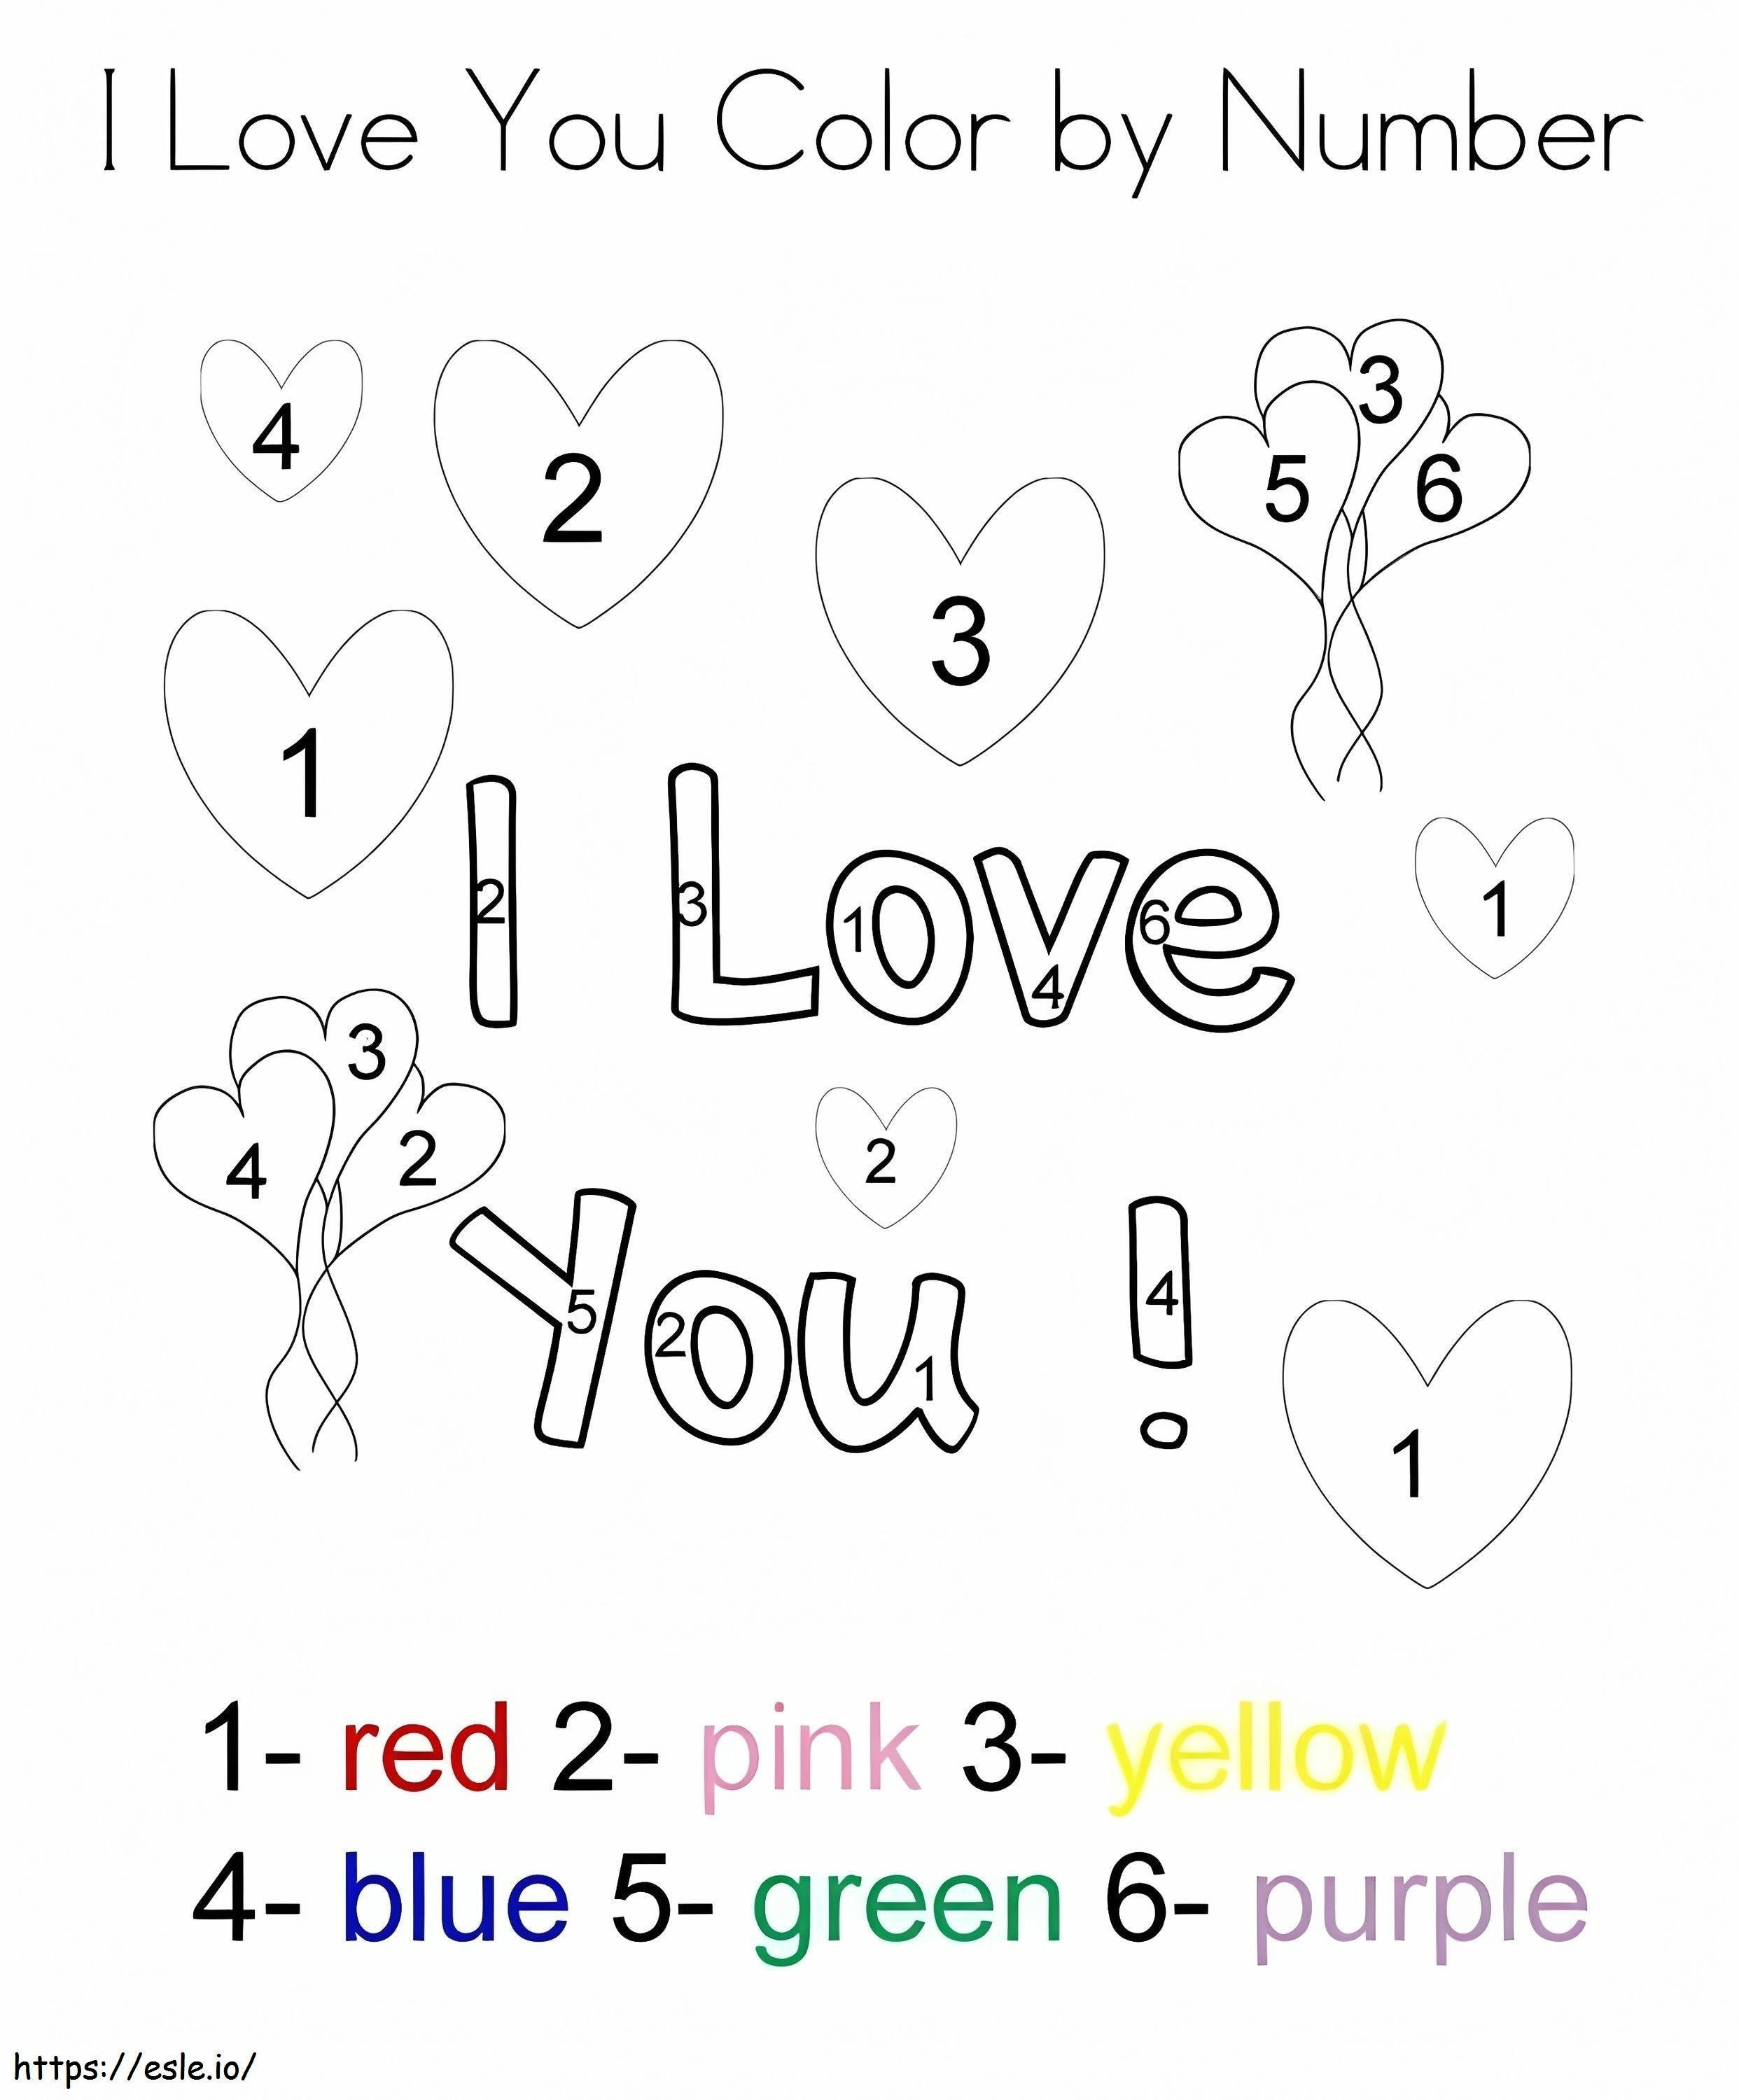 I Love You Color By Number coloring page